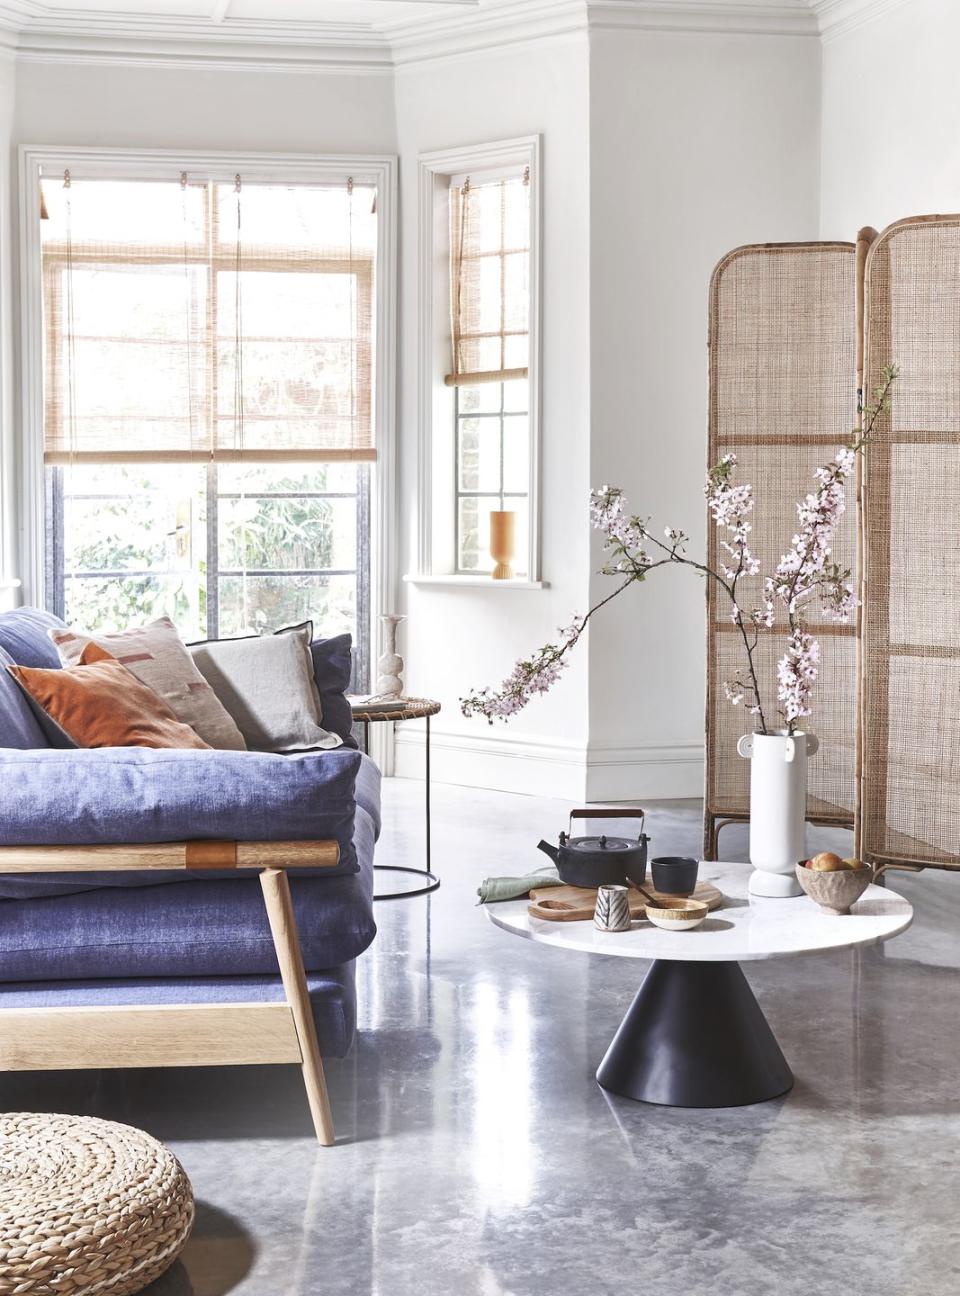 <p>On-trend materials like marble and polished concrete can feel quite cool, so balance them out with delicate, organic details such as bamboo blinds and rattan furniture.</p>